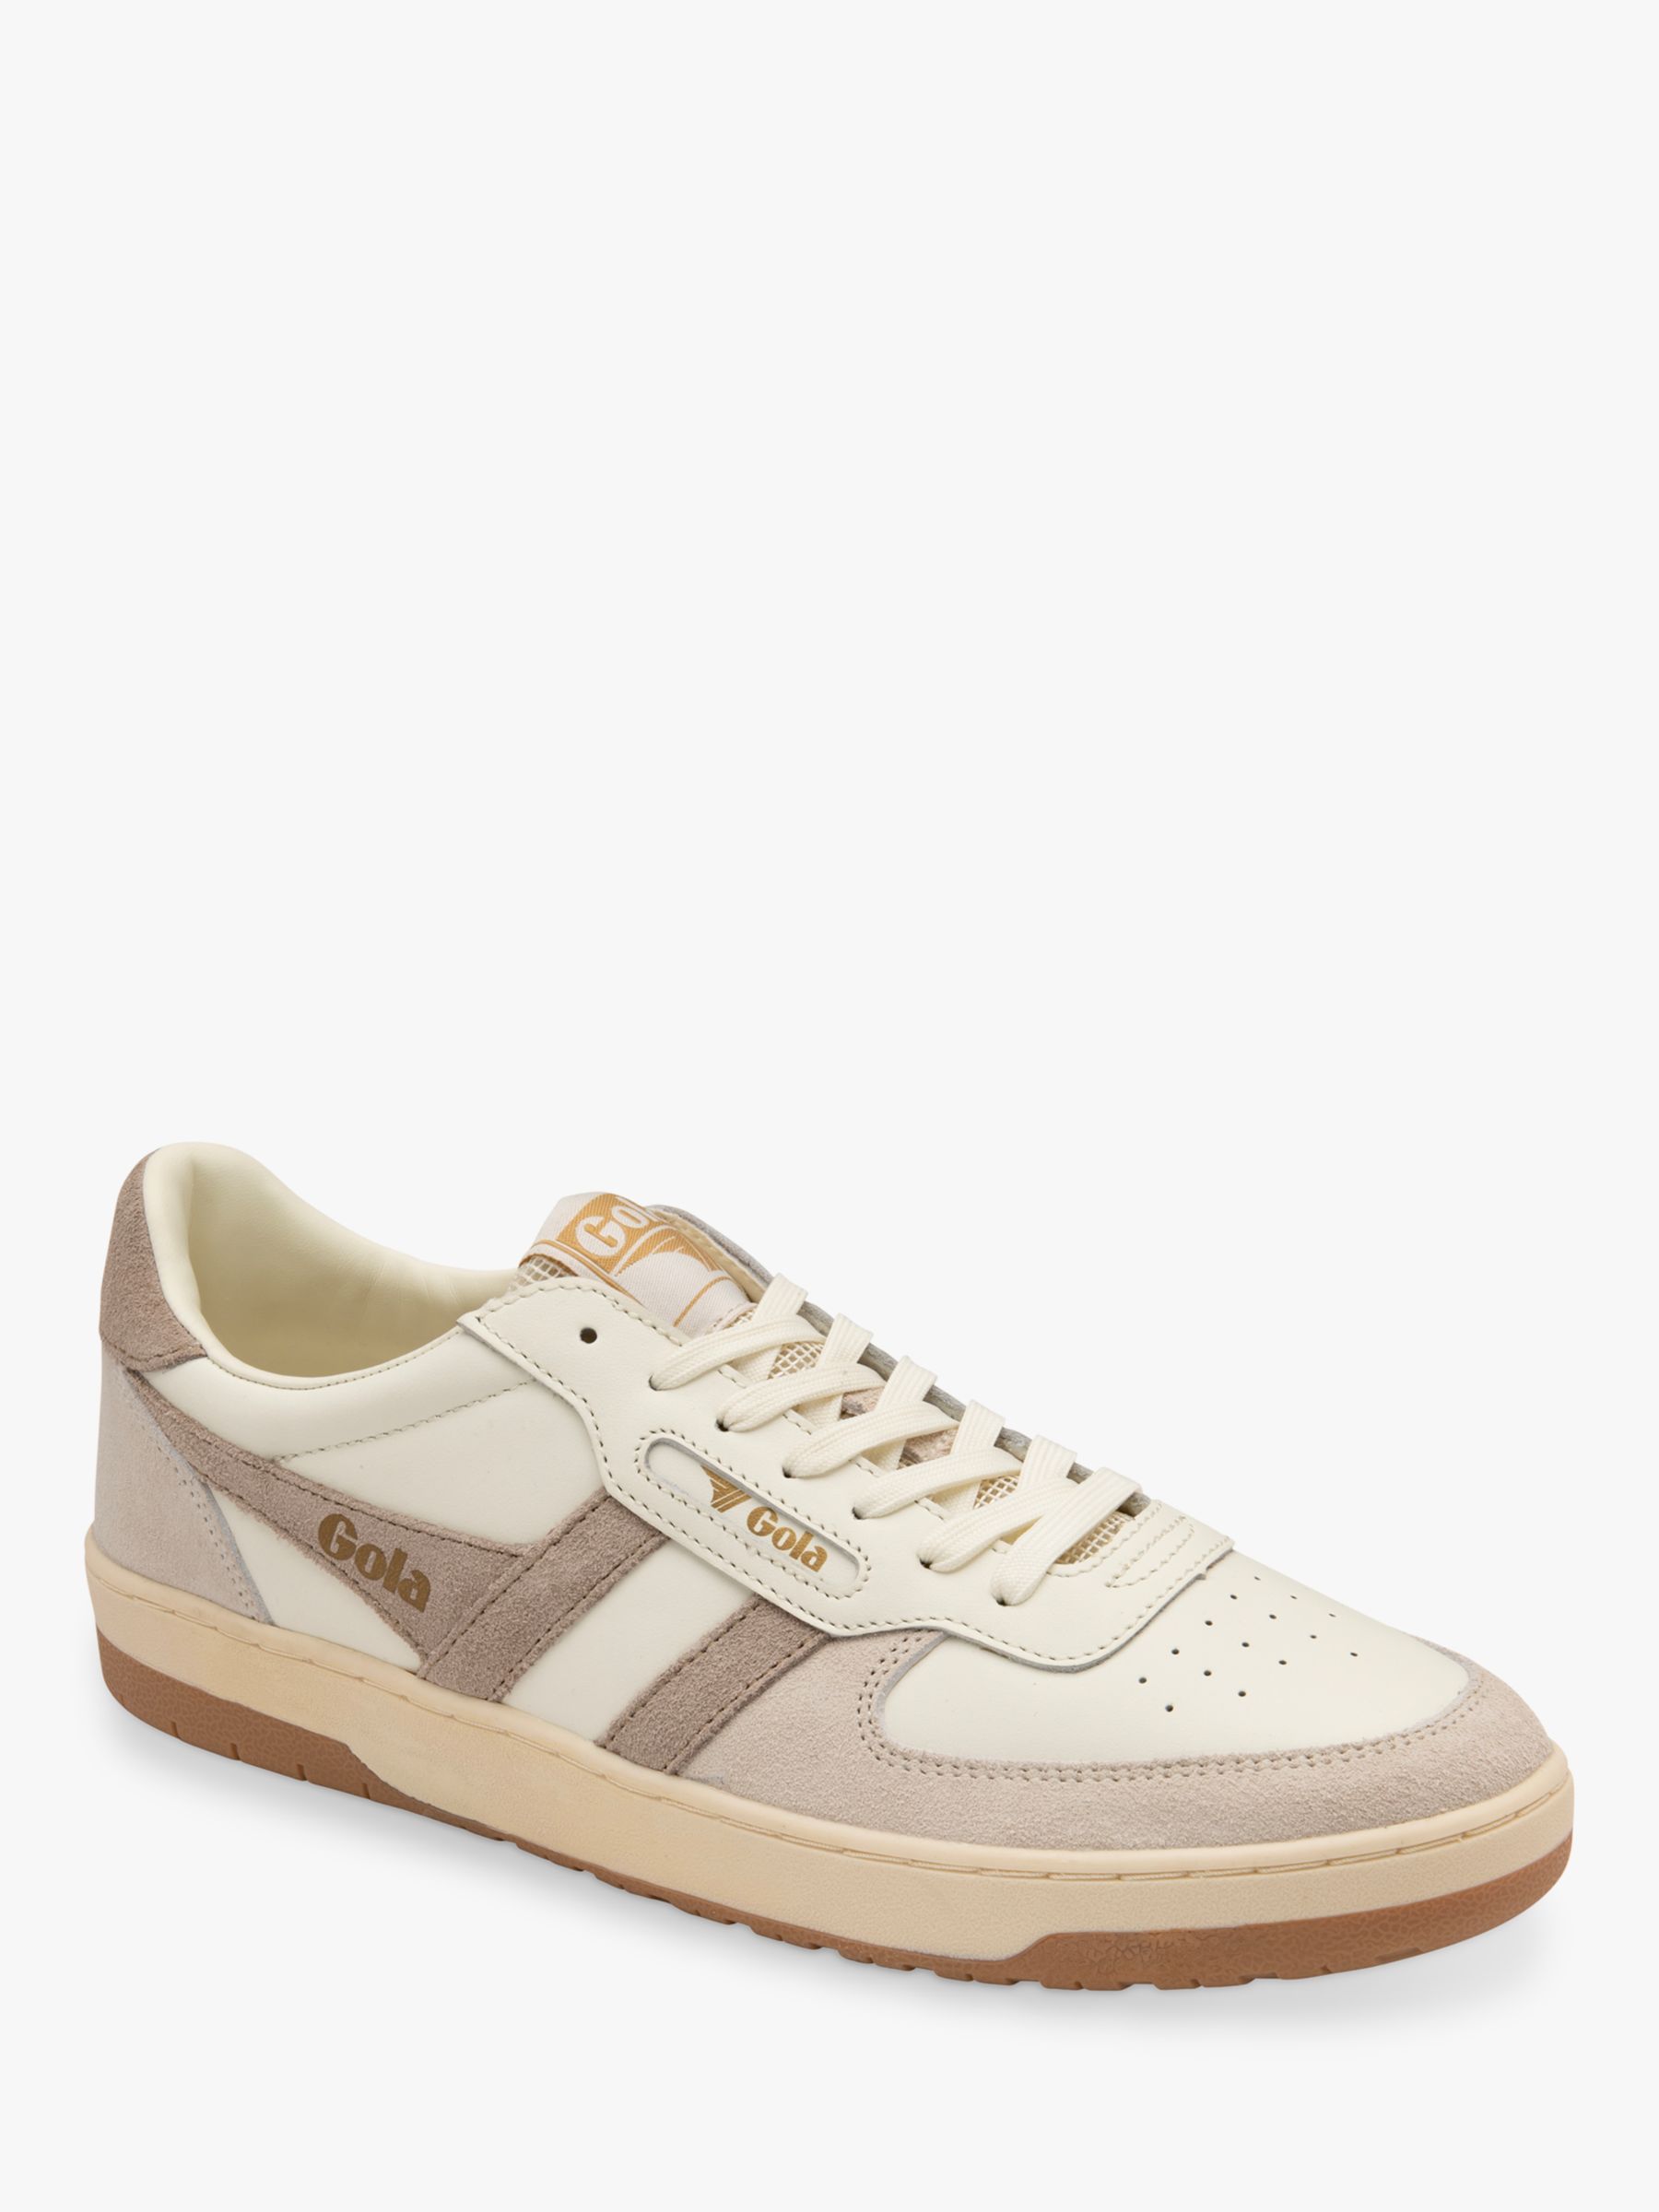 Buy Gola Classics Hawk Leather Lace Up Trainers Online at johnlewis.com